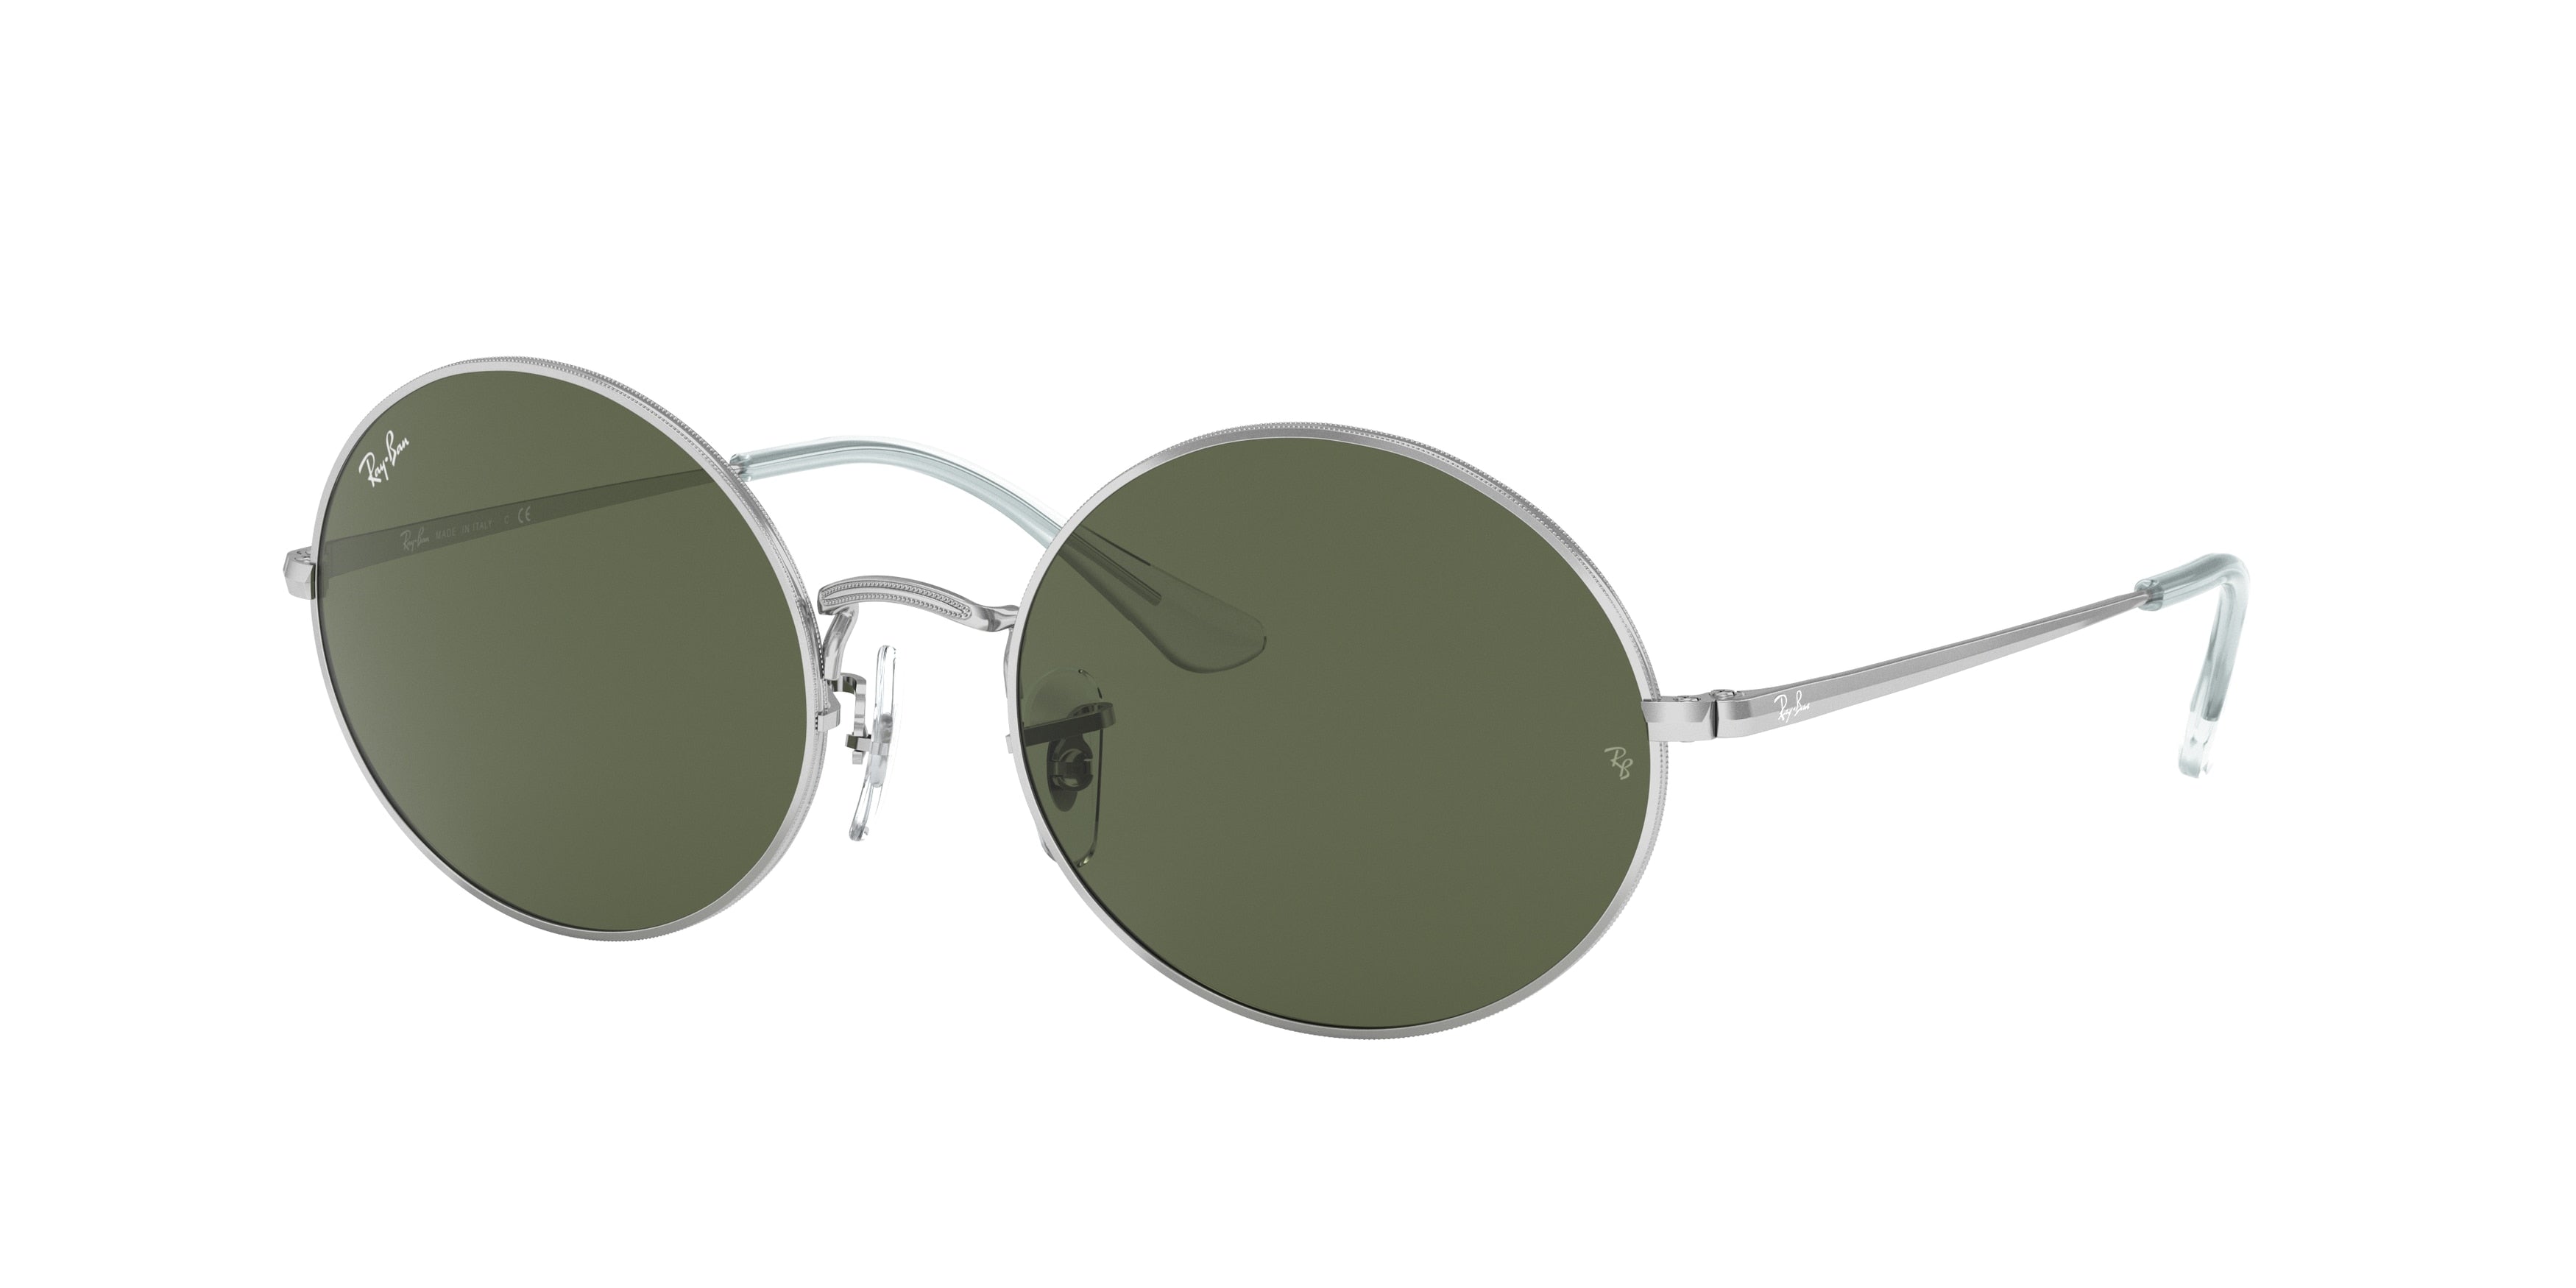 Ray-Ban OVAL RB1970 Oval Sunglasses